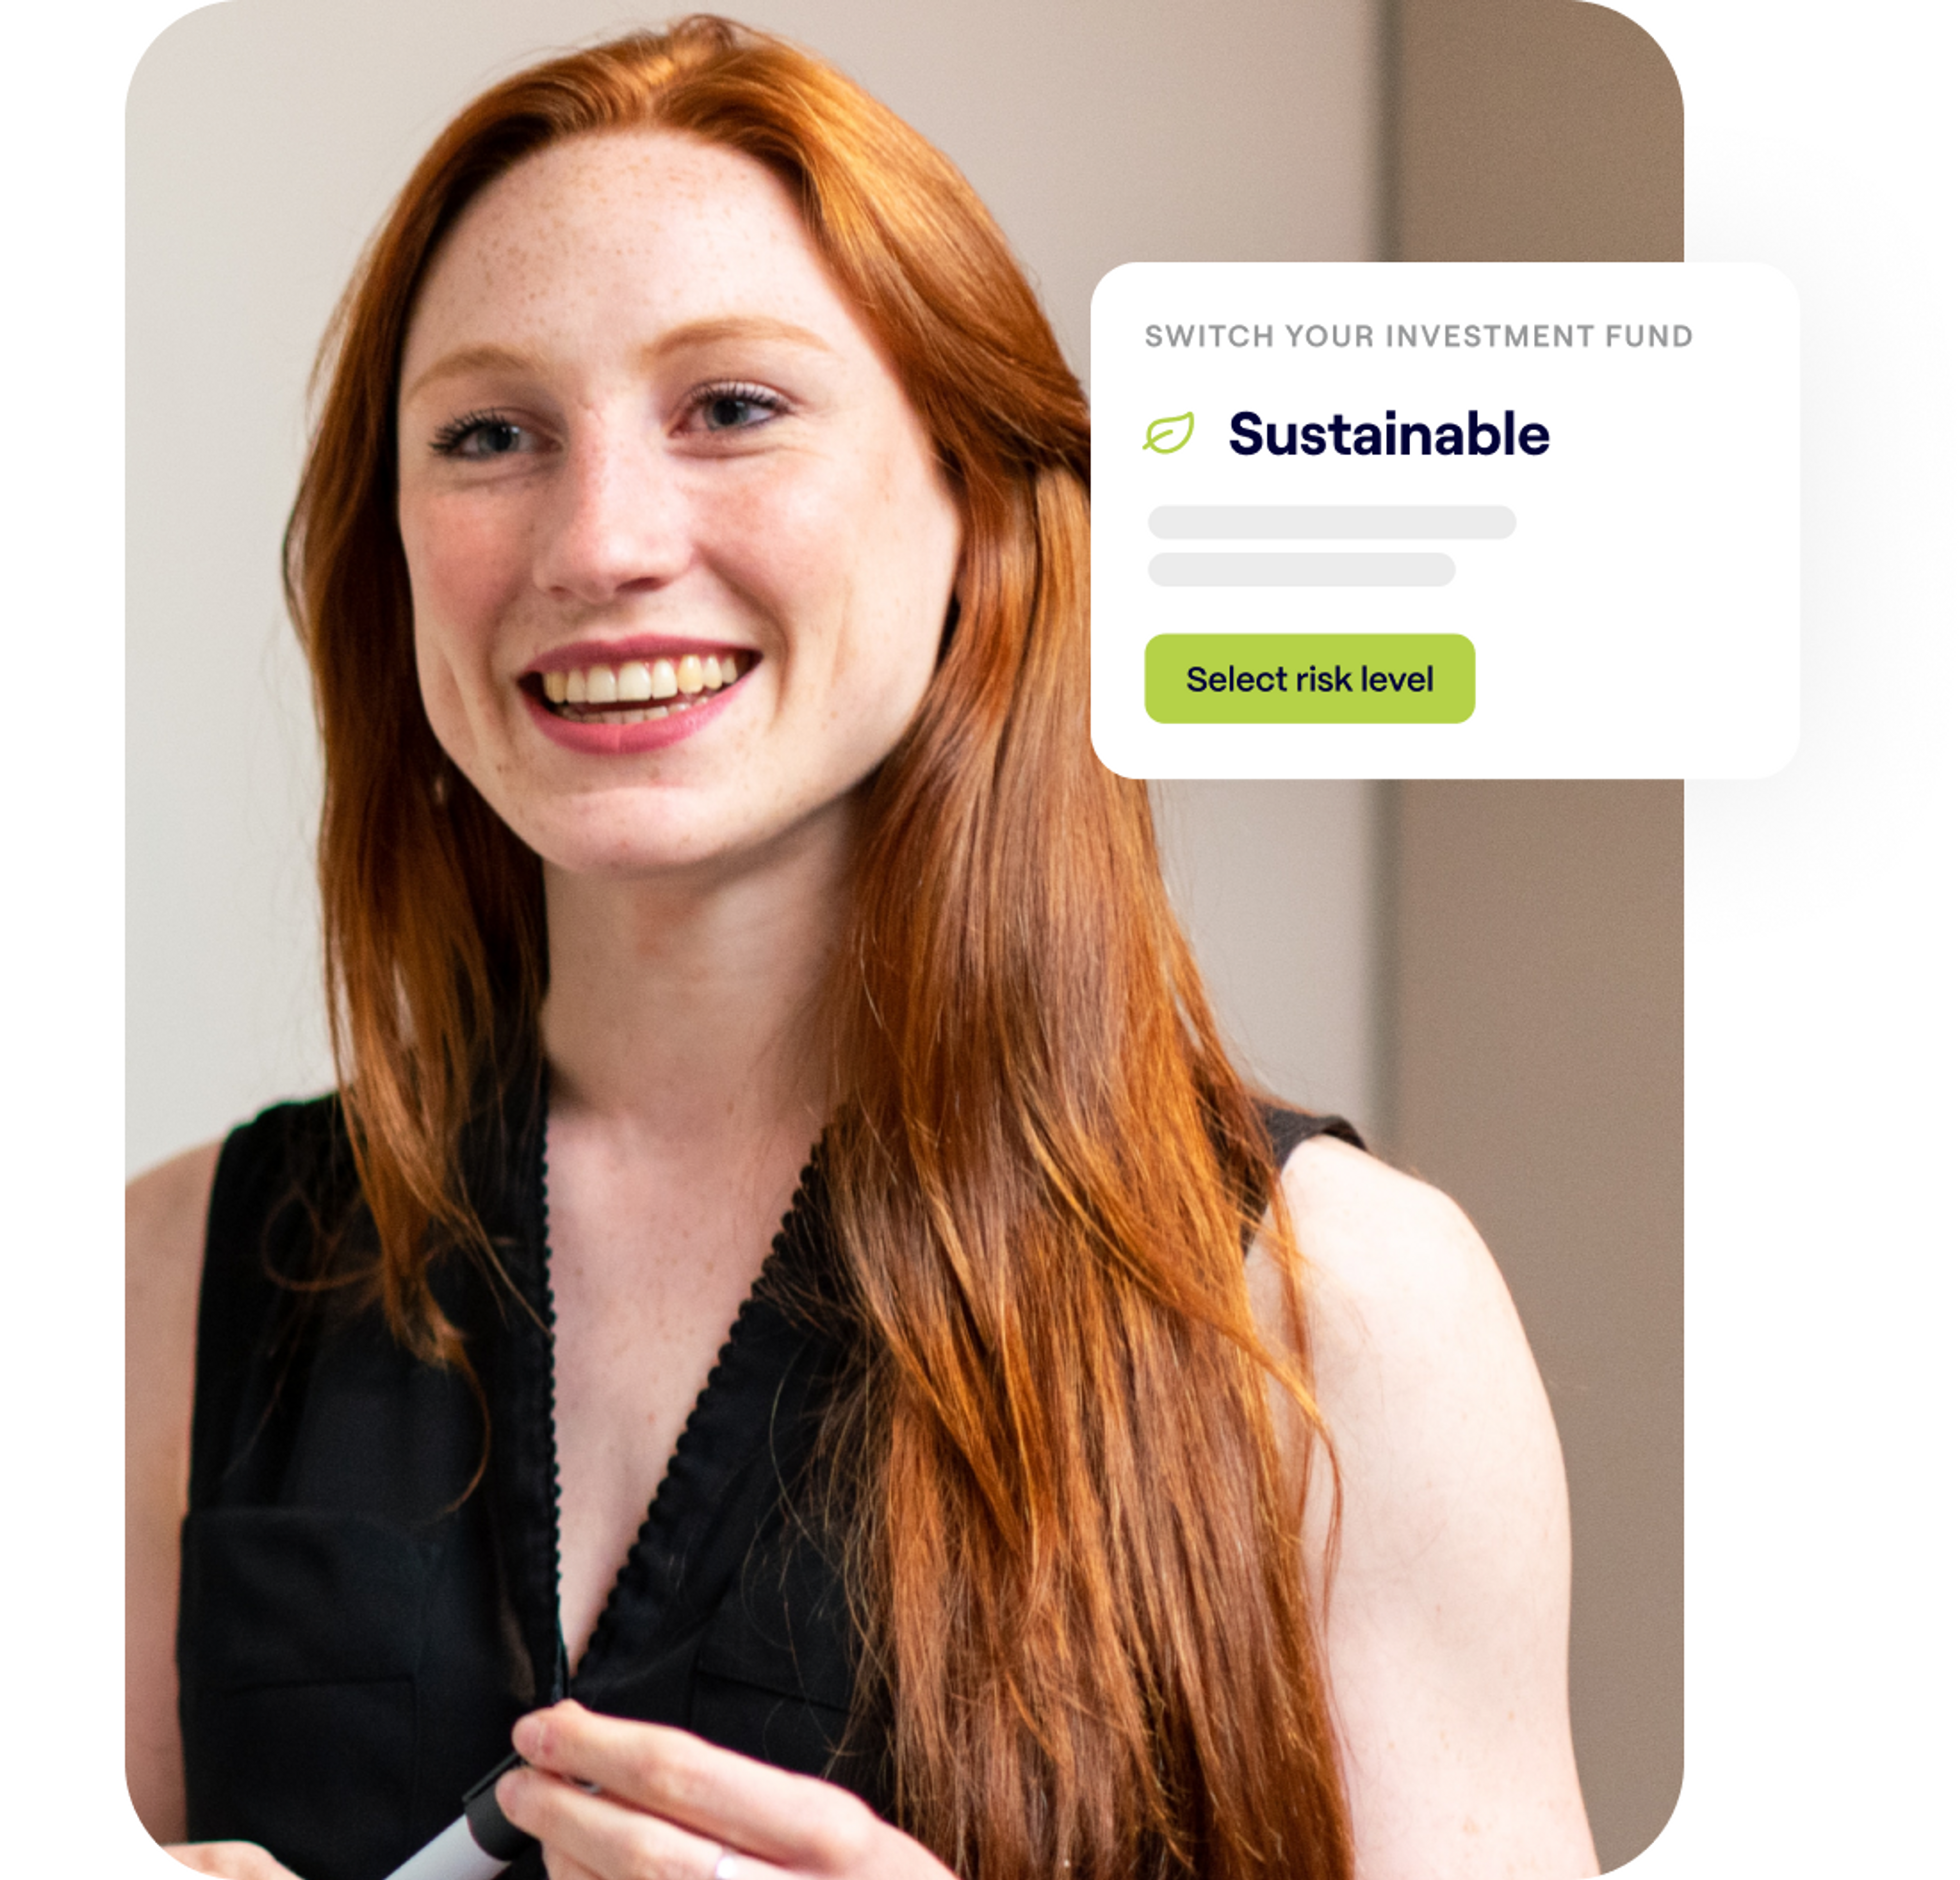 A photo of a woman smiling and an excerpt of the Penfold pension app showing the Sustainable investment fund screen